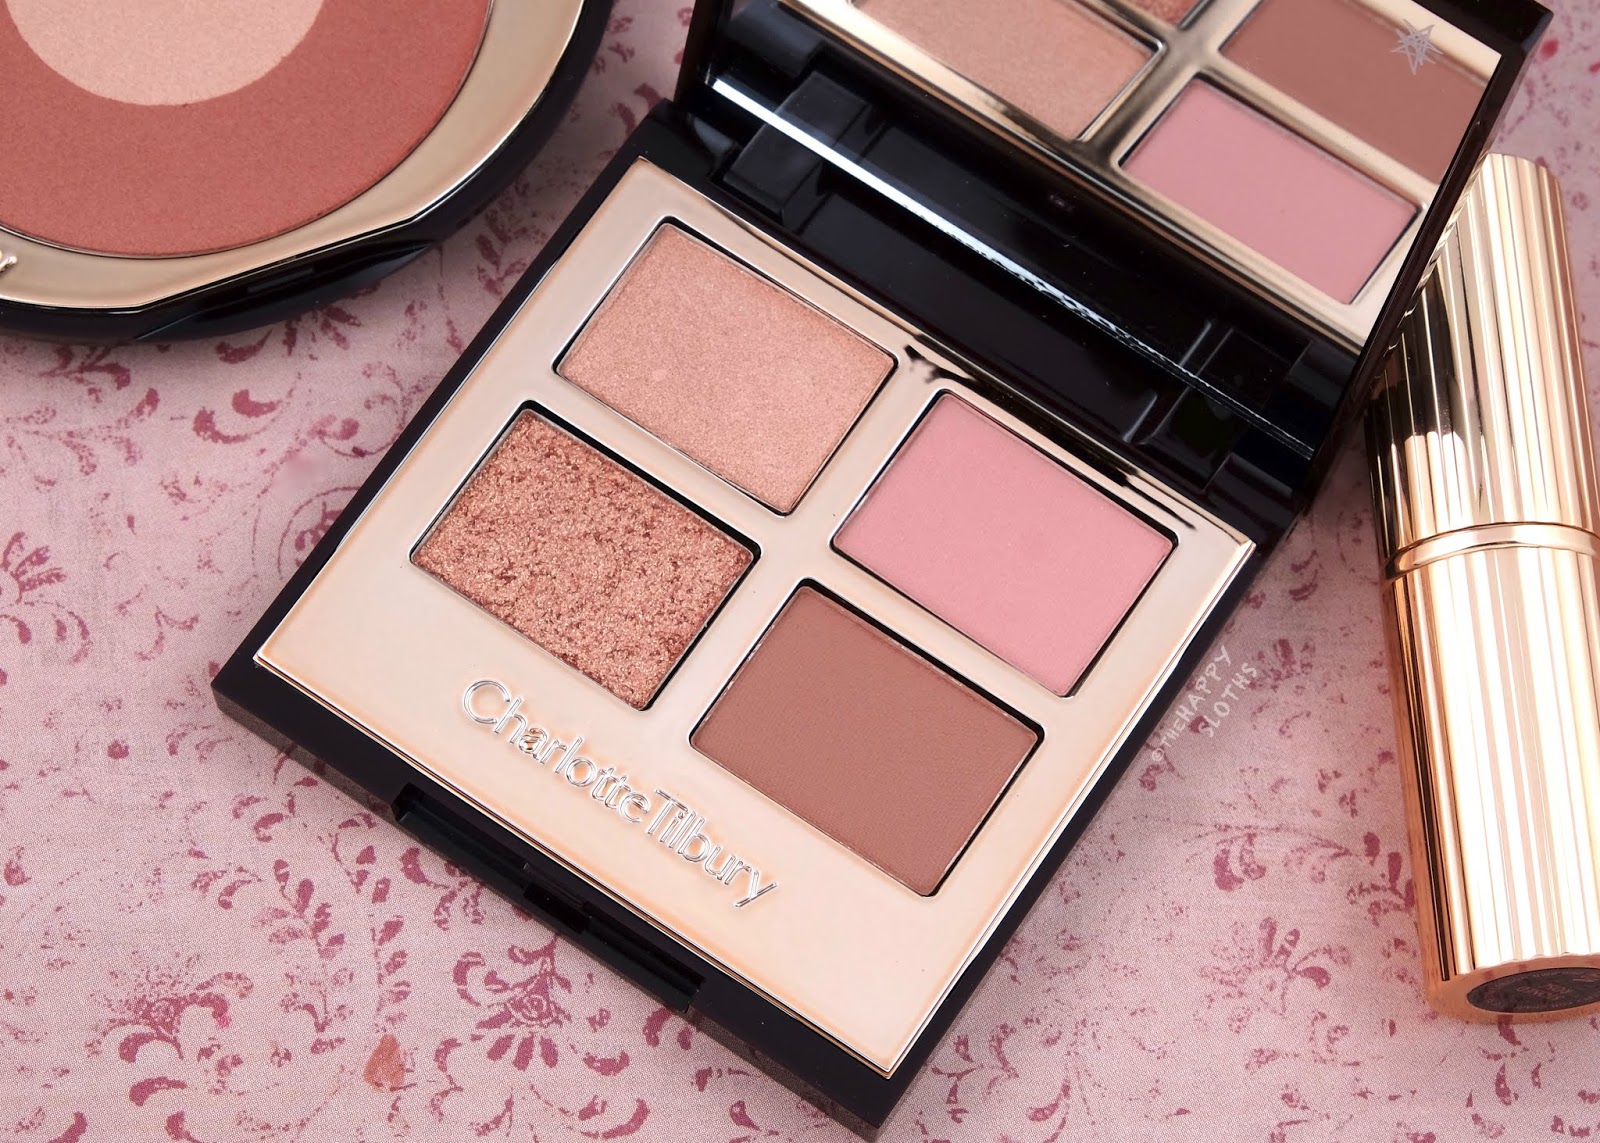 Charlotte Tilbury | Pillow Talk Luxury Eyeshadow Palette: Review and Swatches